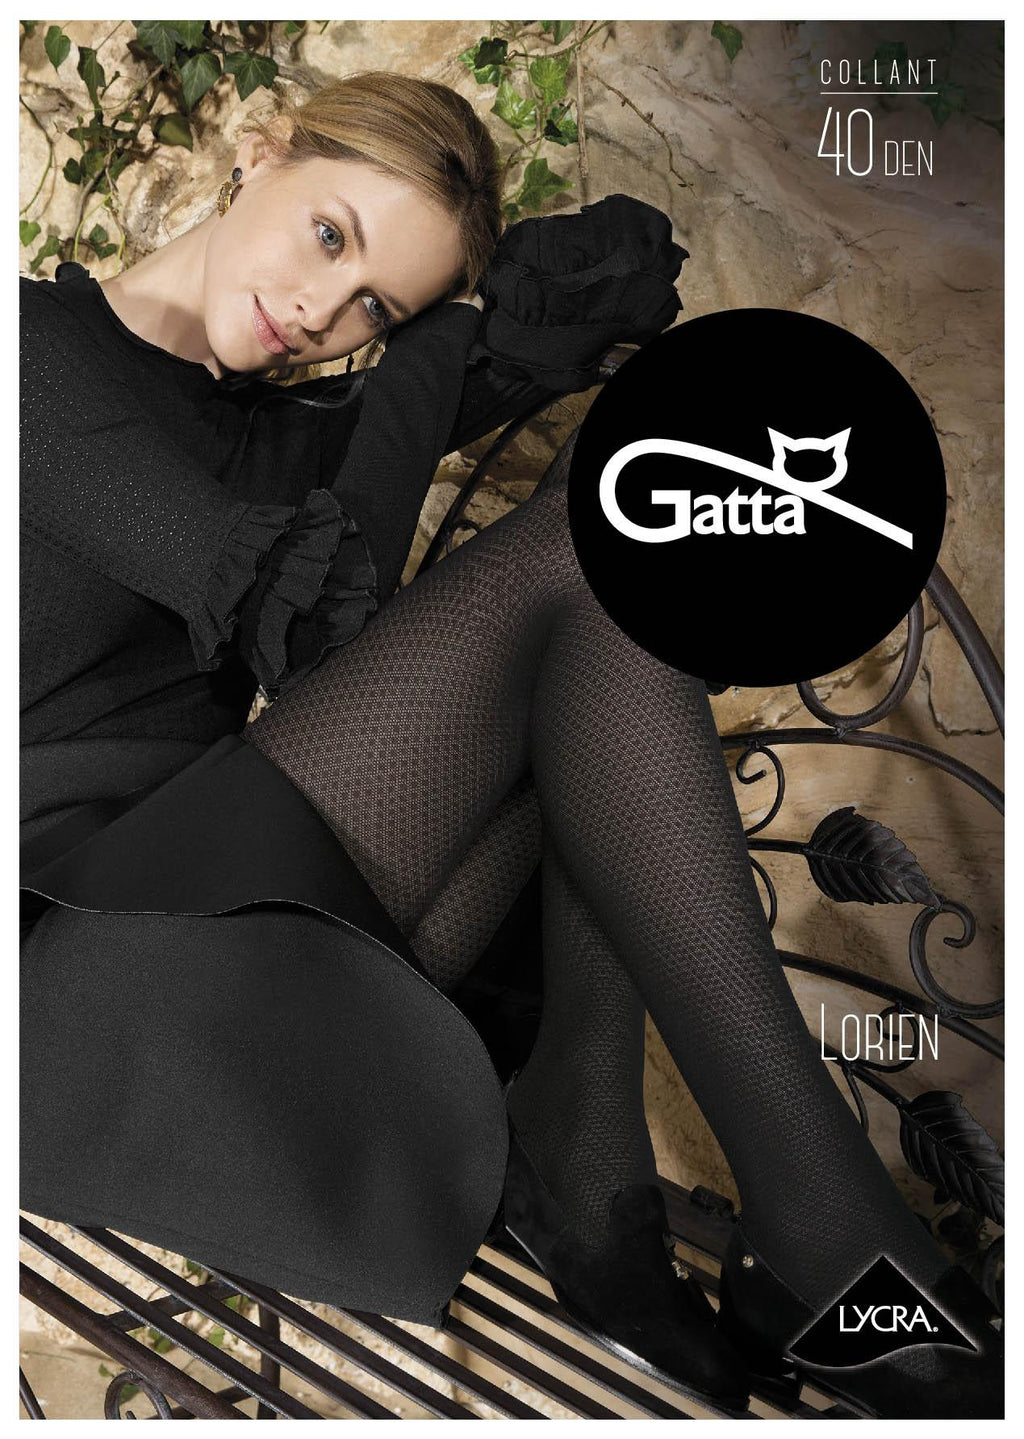 Women's modeling tights Gatta Body Lift-up 20den buy at best prices with  international delivery in the catalog of the online store of lingerie